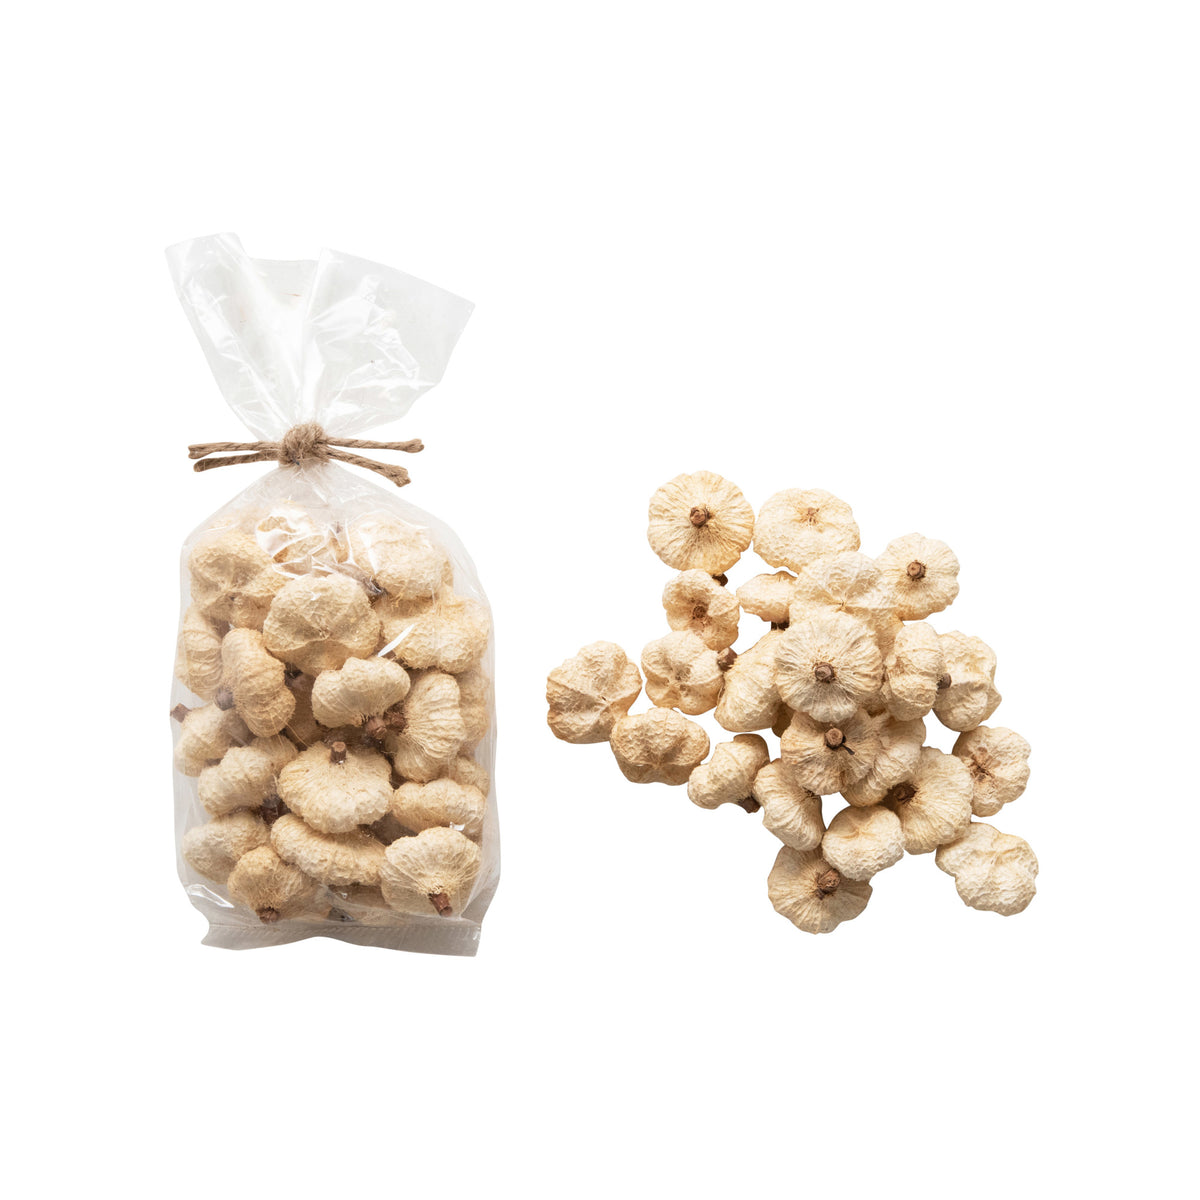 1" Round Dried Natural Peepal Pods in Bag, Cream (Contains 75 Pieces)